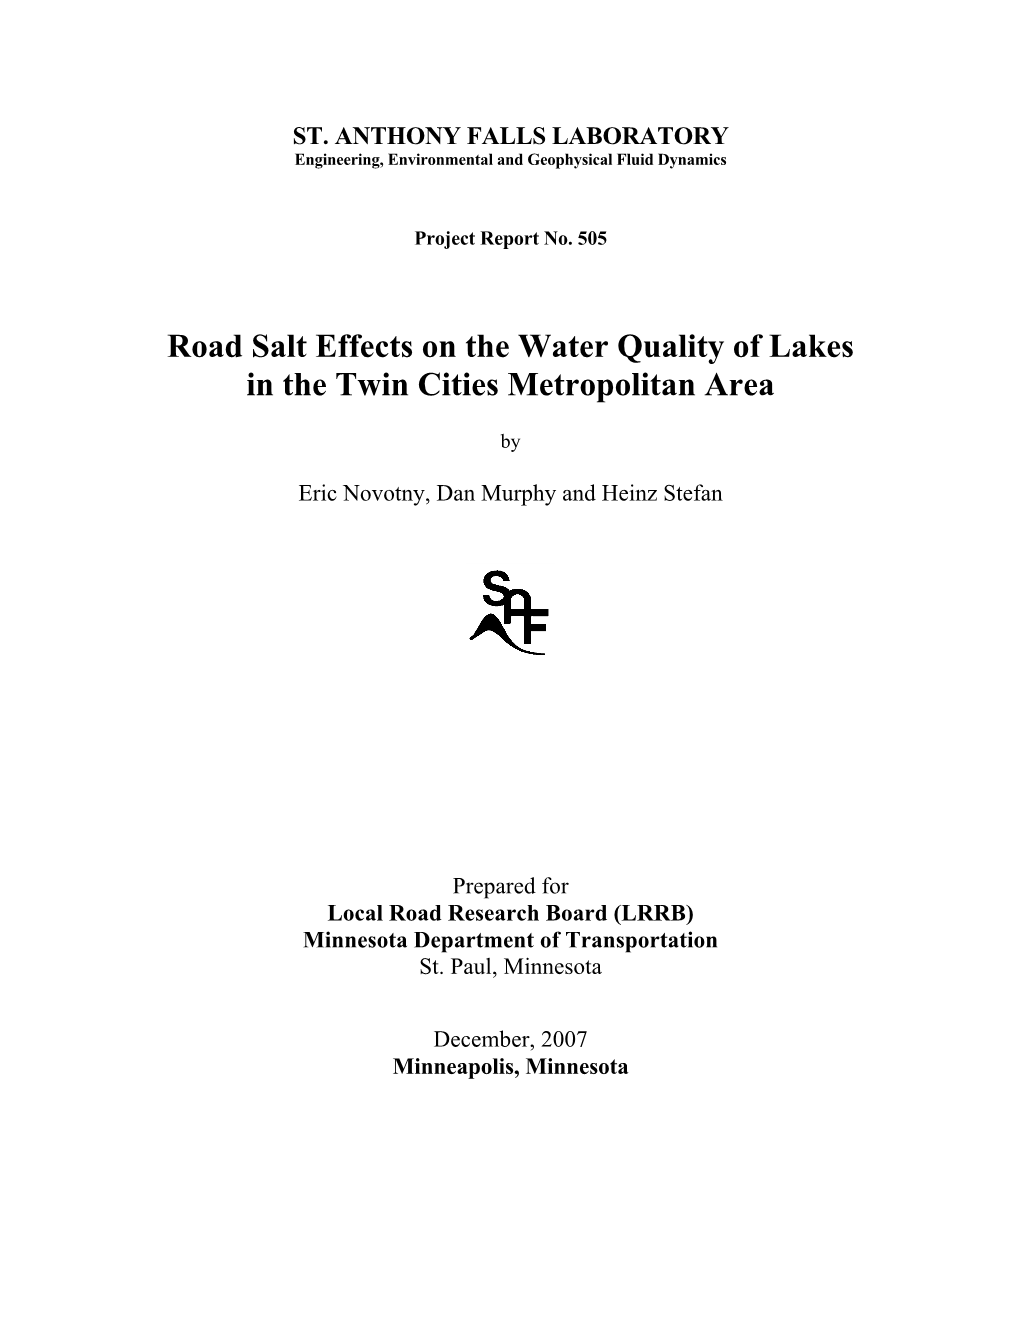 Road Salt Effects on the Water Quality of Lakes in the Twin Cities Metropolitan Area